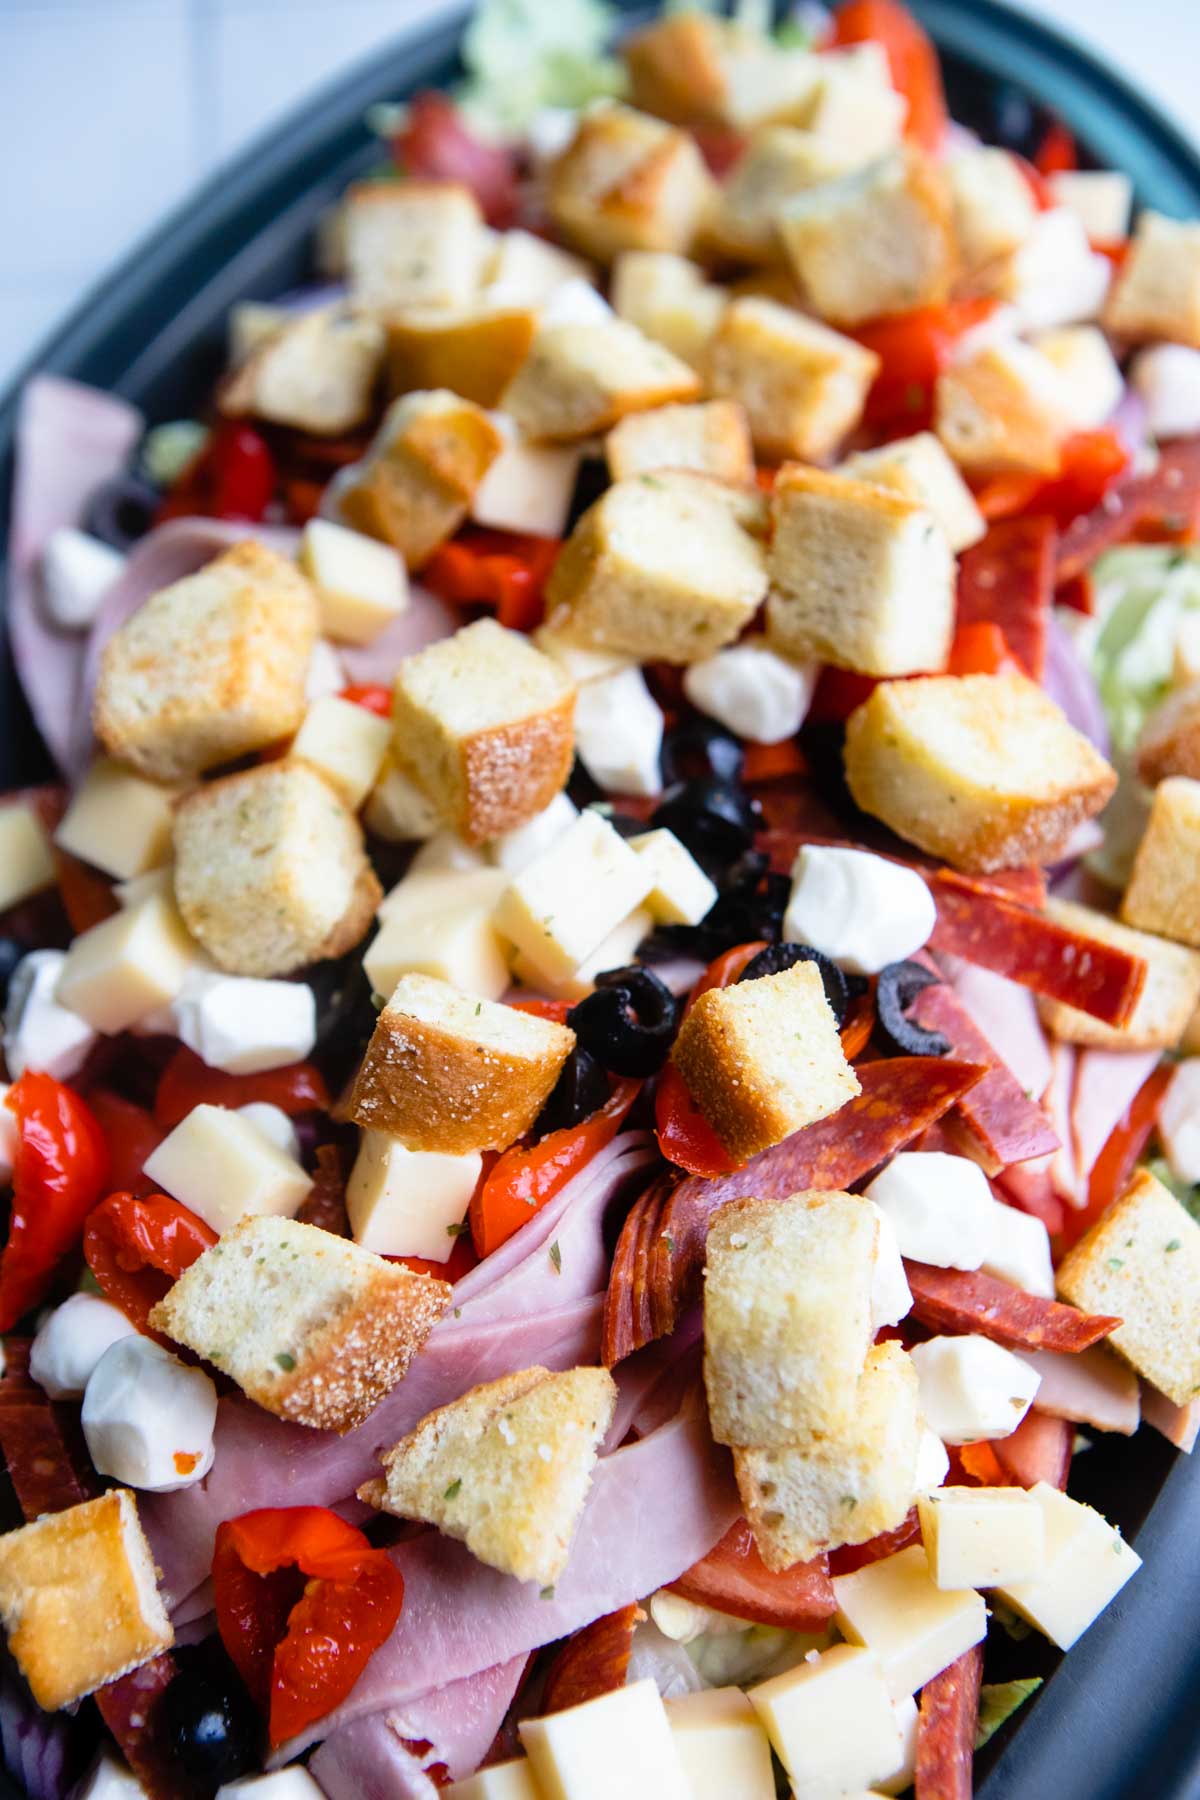 Italian sub salad topped with homemade croutons